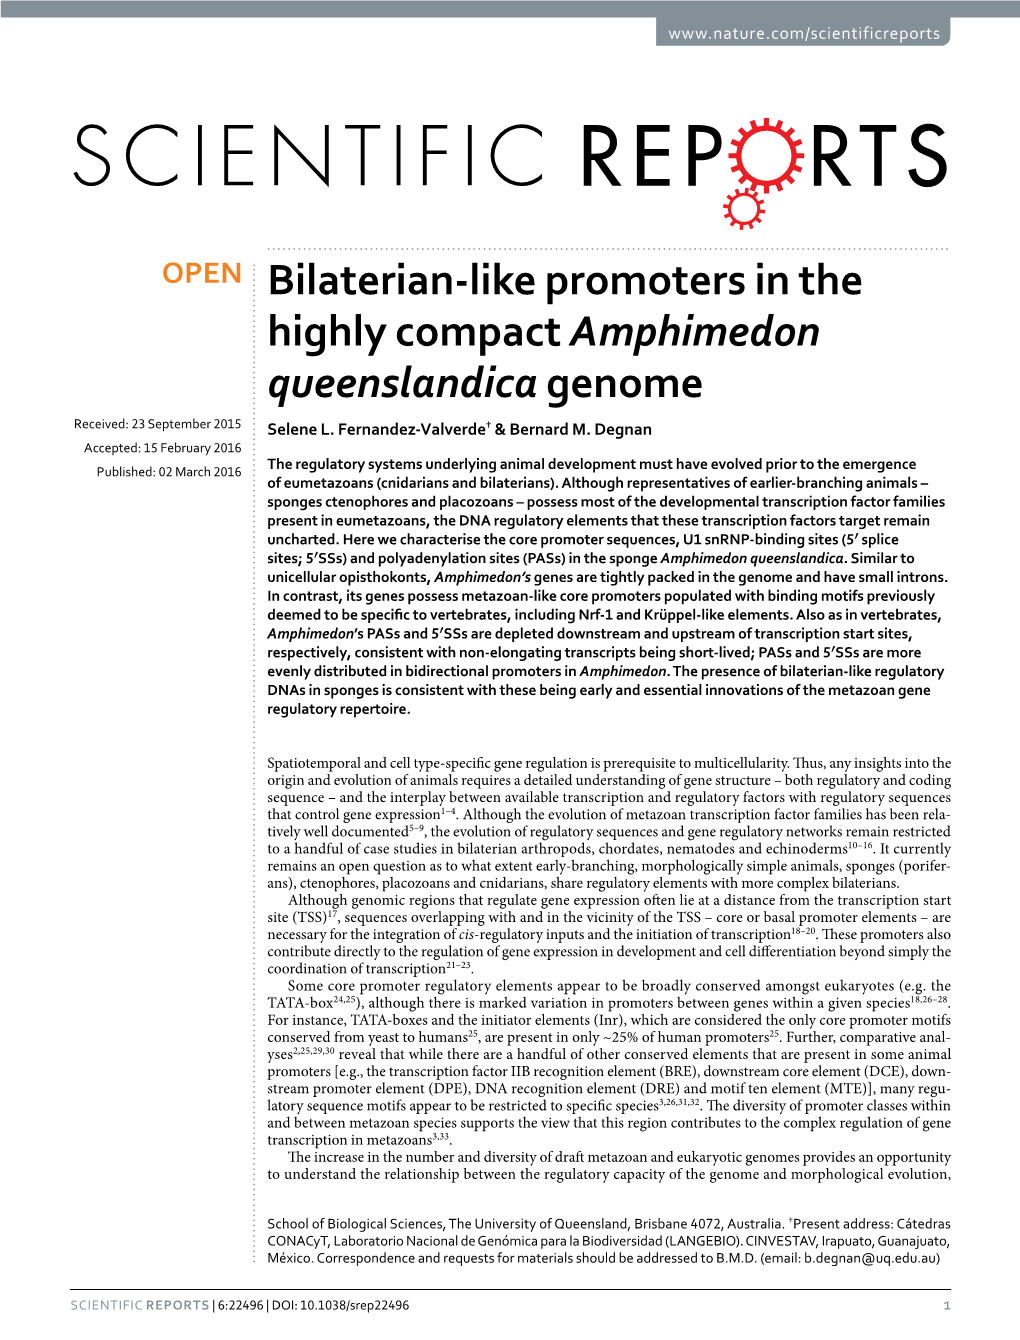 Bilaterian-Like Promoters in the Highly Compact Amphimedon Queenslandica Genome Received: 23 September 2015 Selene L